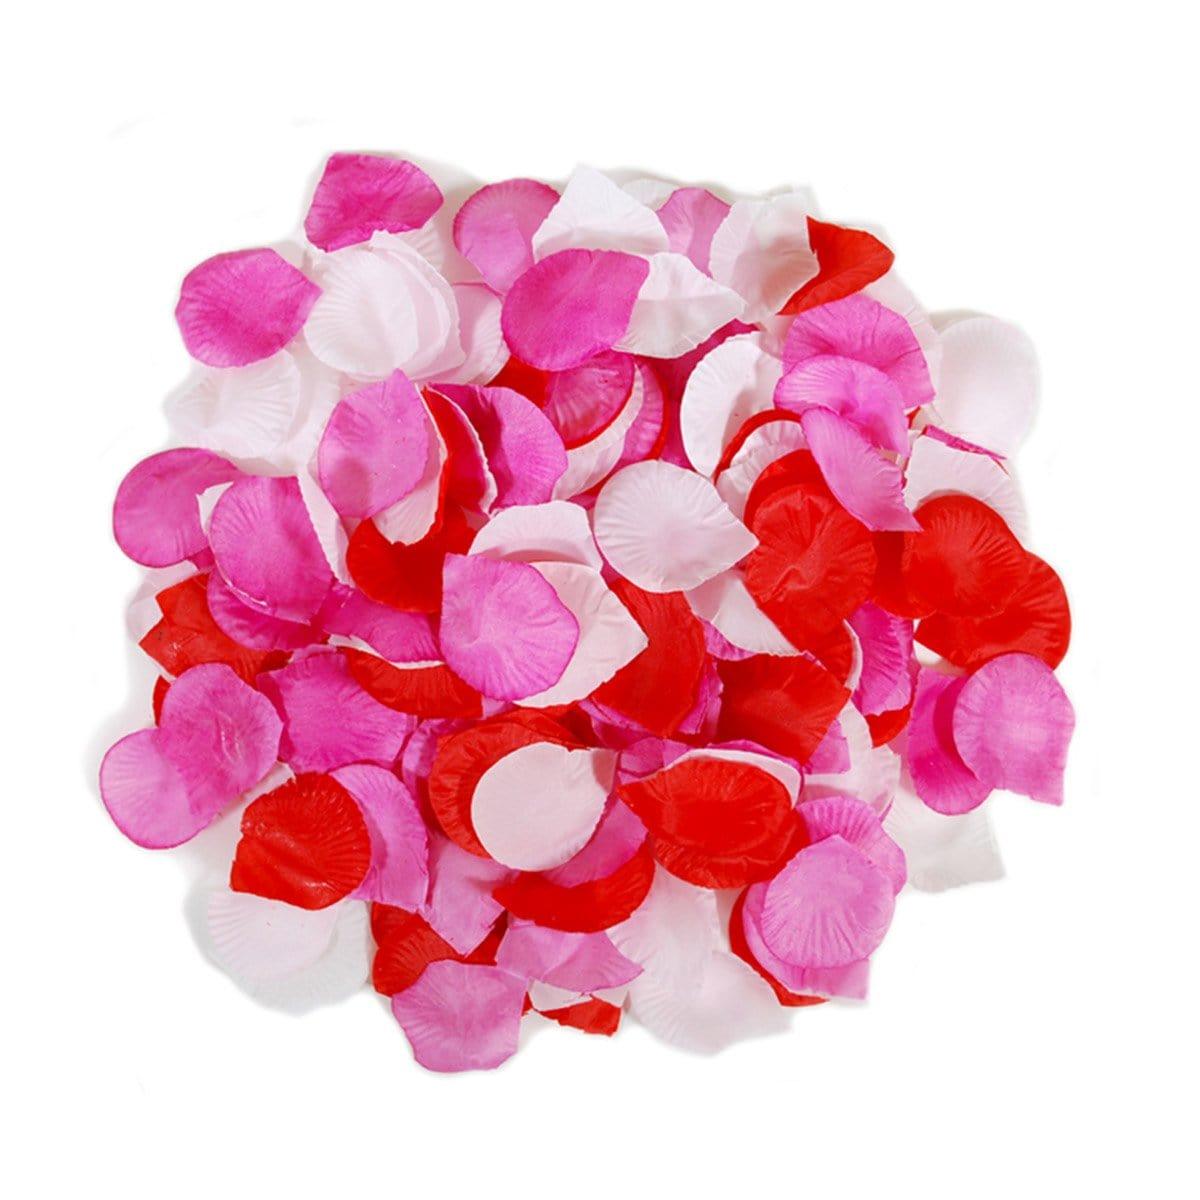 Buy Wedding Red, Pink & White Rose Petals sold at Party Expert